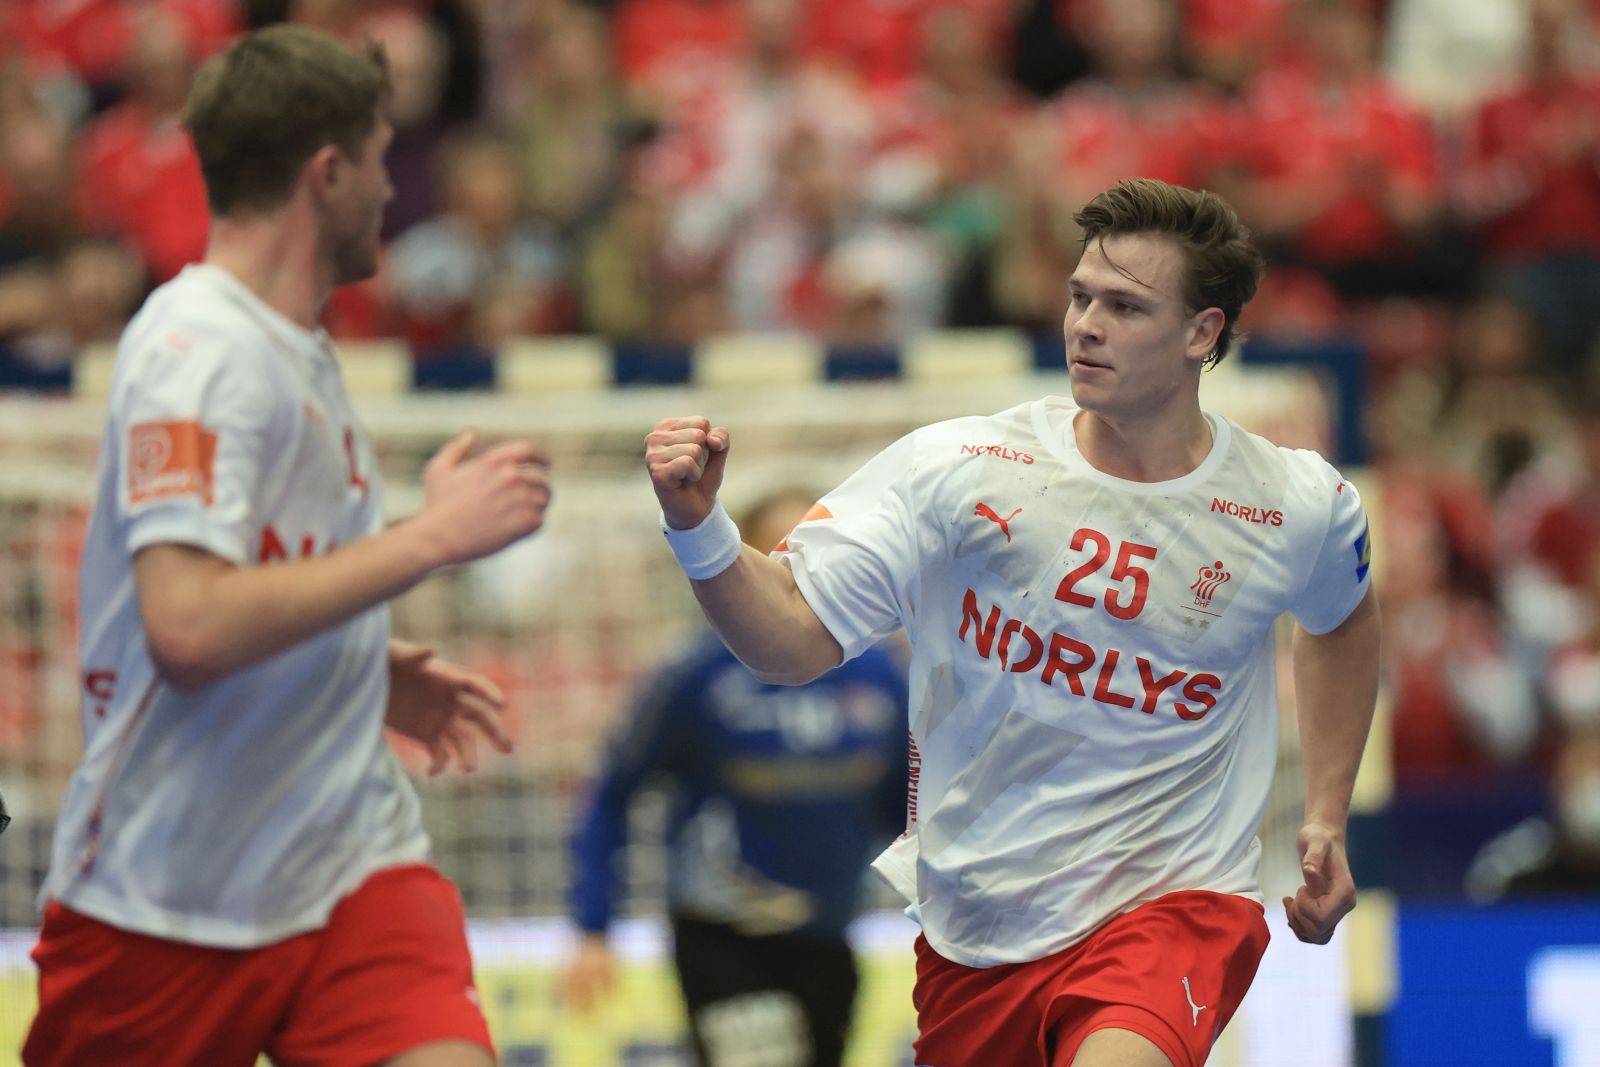 epa10421319 Denmark's Lukas Lindhard Jorgensen celebrates a goal during the IHF Men's World Championship Handball match, Main Round group 4, between USA and Denmark in Malmo, Sweden, 21 January 2023.  EPA/Andreas Hillergren  SWEDEN OUT